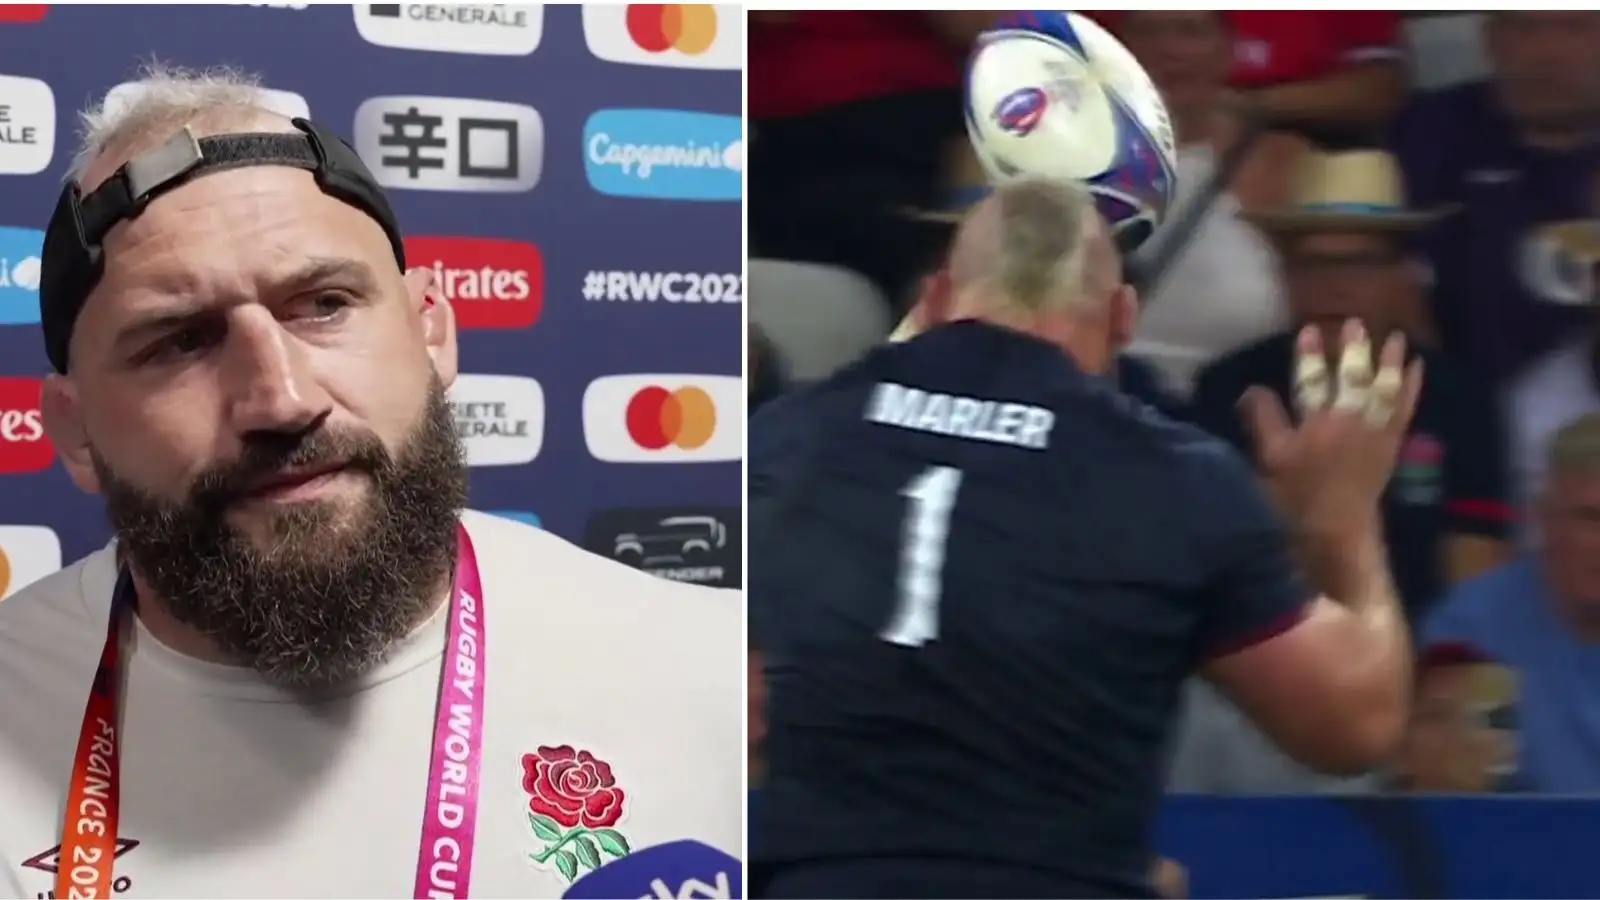 England prop Joe Marler after the Rugby World Cup match against Japan.